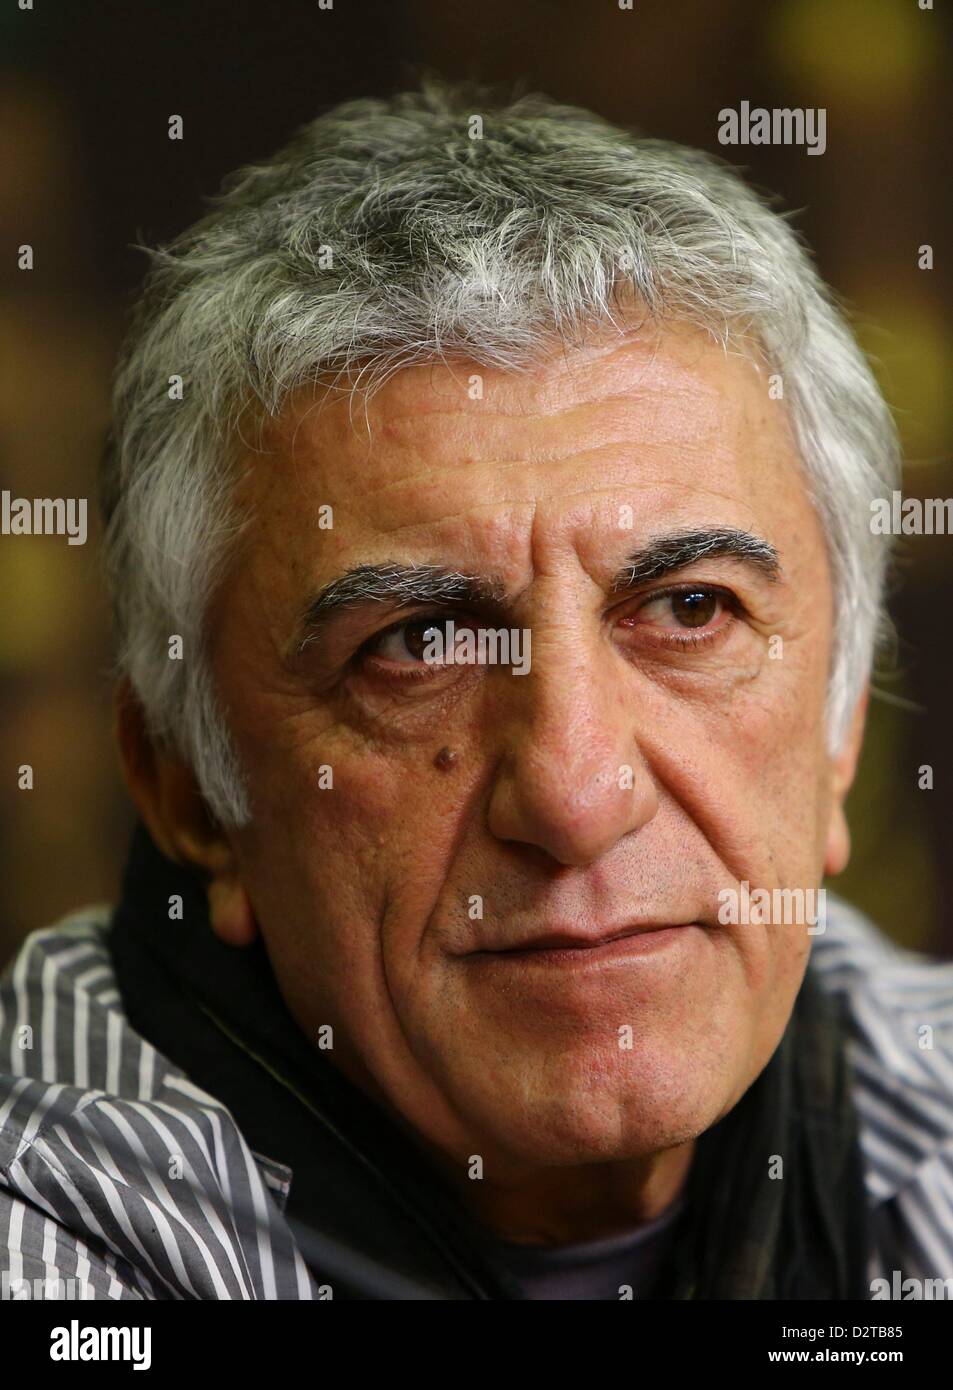 Save preview image - tehran-iran-actor-reza-kianian-at-day-1-of-the-31th-international-D2TB85